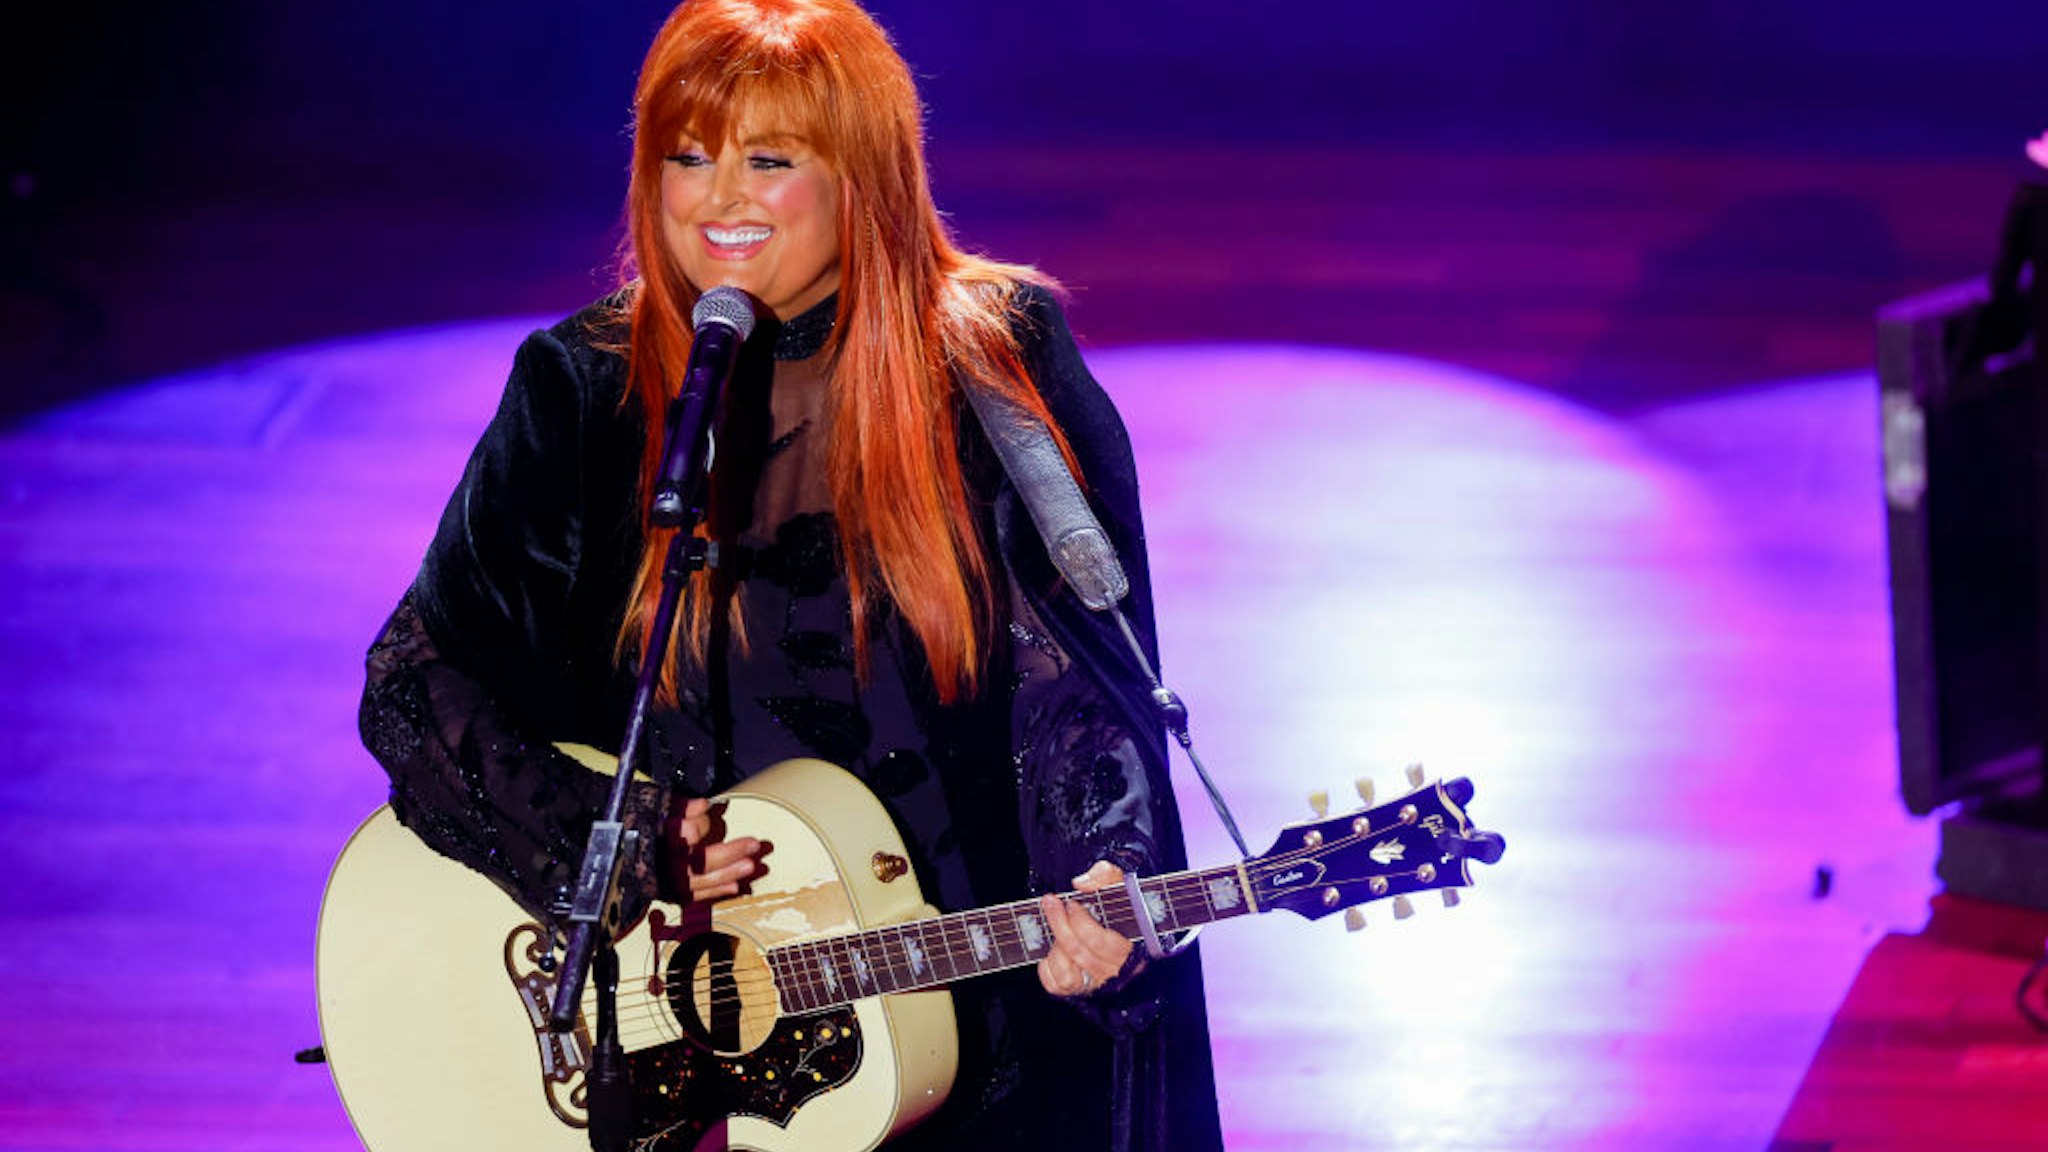 NASHVILLE, TENNESSEE - AUGUST 24: Wynonna performs during the 15th Annual Academy Of Country Music Honors at Ryman Auditorium on August 24, 2022 in Nashville, Tennessee. (Photo by Brett Carlsen/Getty Images for ACM)